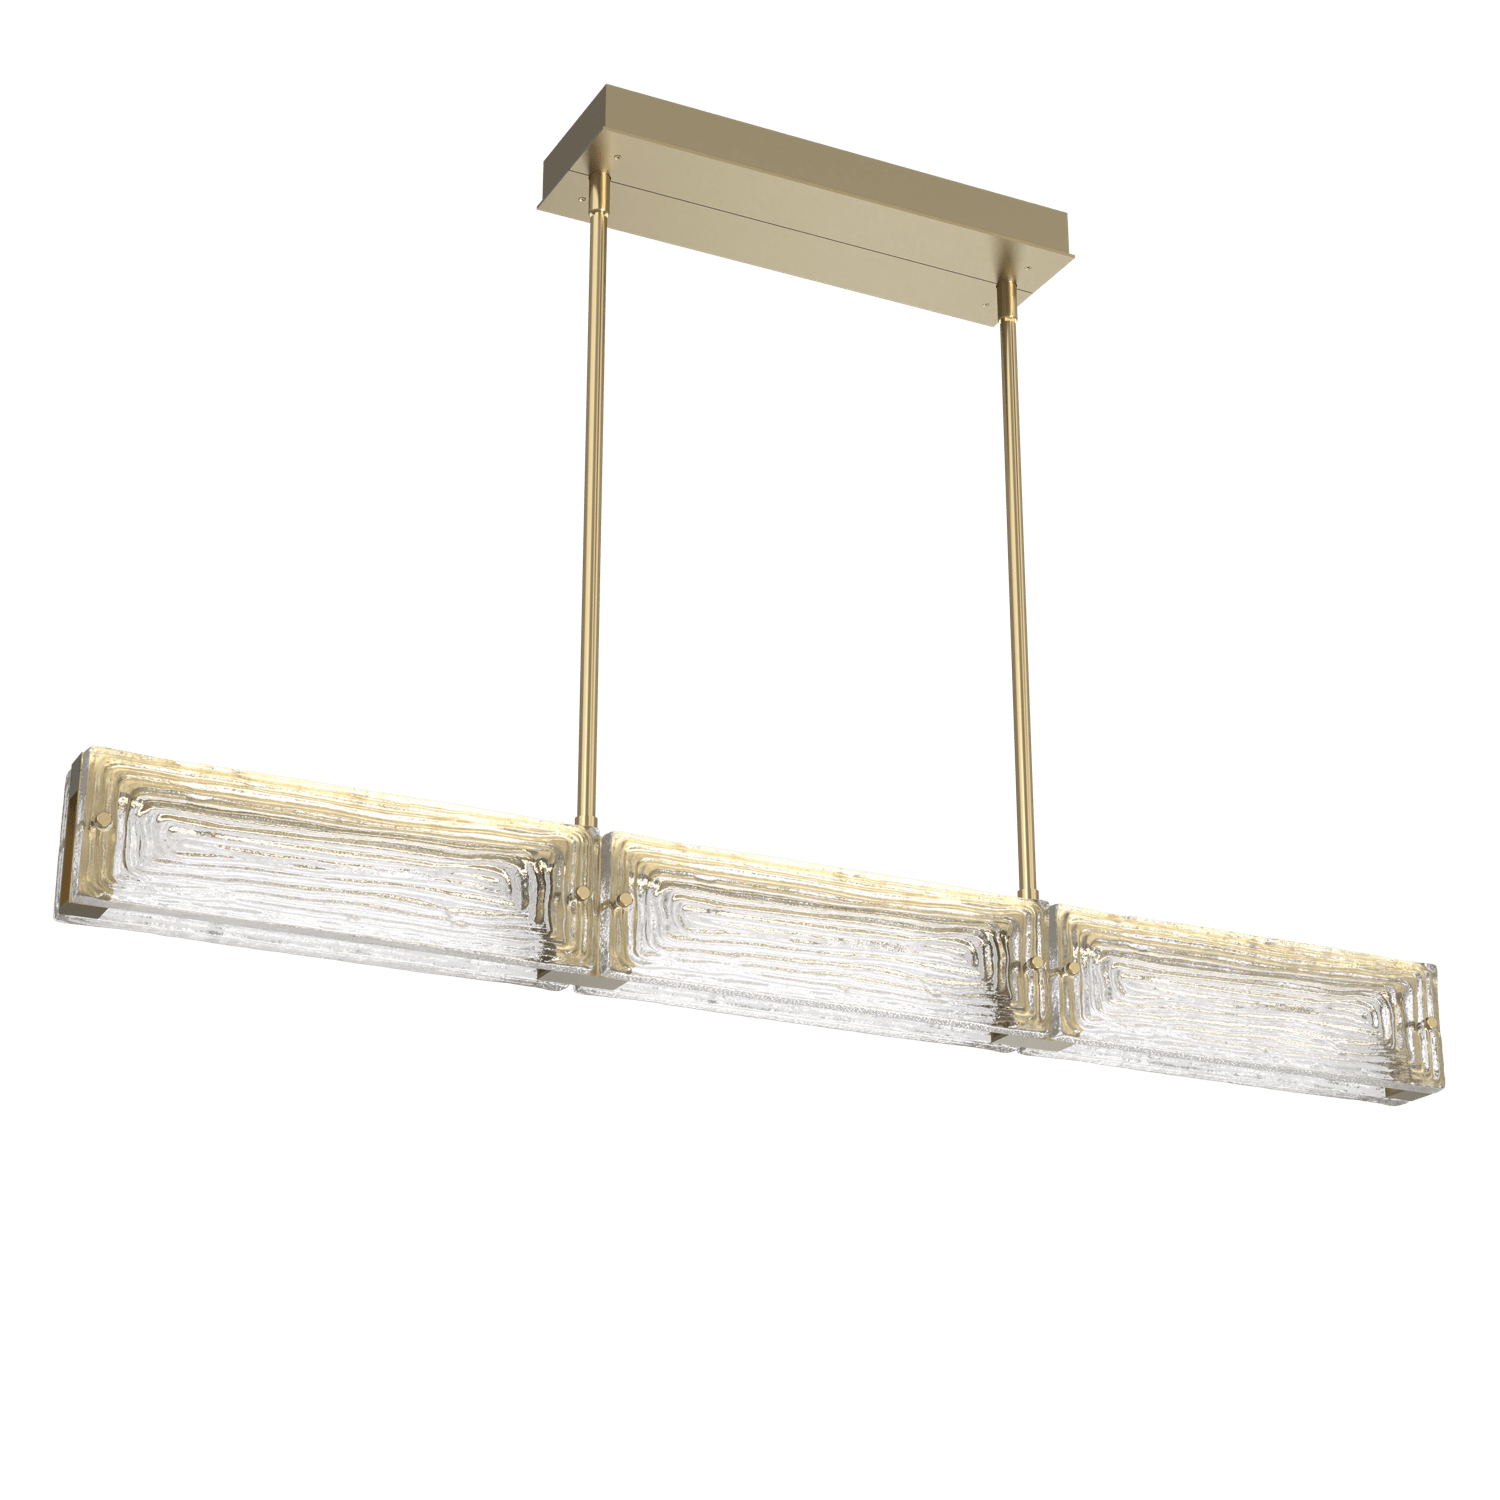 PLB0090-43-GB-TL-Hammerton-Studio-Tabulo-43-inch-linear-chandelier-with-gilded-brass-finish-and-clear-linea-cast-glass-shade-and-LED-lamping